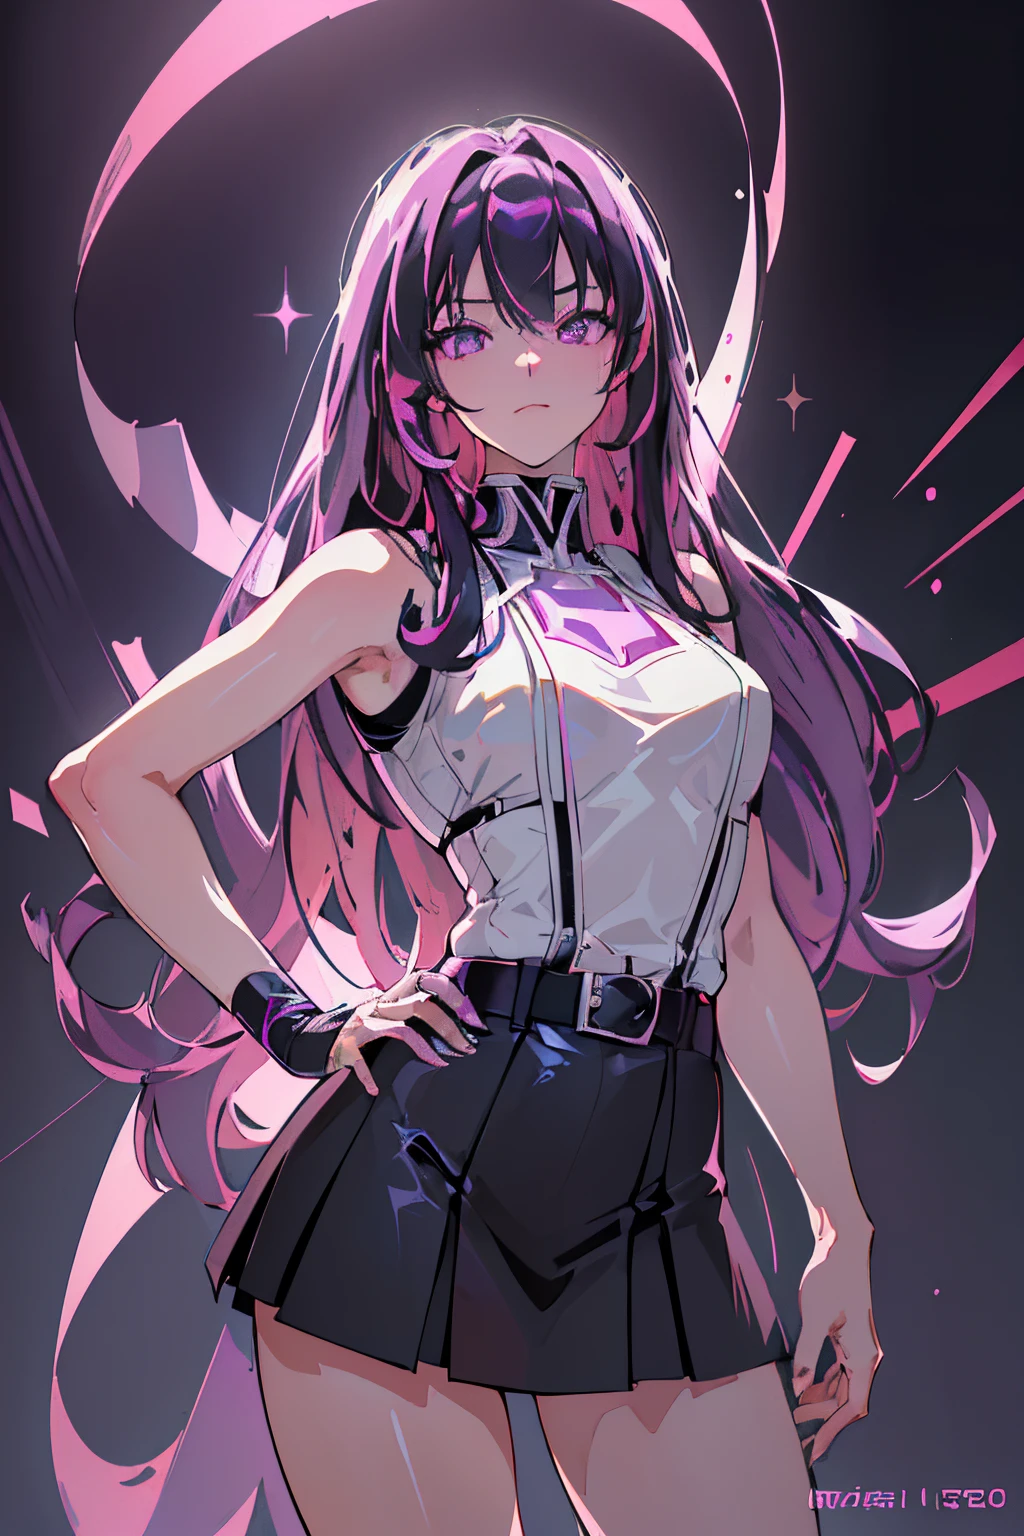 Anime, Girl, (((1girl))), Techwear, (((Deep Violet Hair, Long Hair))), ((Vibrant Light Purple Eyes eyes:1.3, Upturned Eyes: 1, Perfect Eyes, Beautiful Detailed Eyes, Gradient eyes: 1, Finely Detailed Beautiful Eyes: 1, Symmetrical Eyes: 1, Big Highlight On Eyes: 1.2)), ((Fat)), (((Lustrous Skin: 1.5, Bright Skin: 1.5, Skin Fair, Shiny Skin, Very Shiny Skin, Shiny Body, Plastic Glitter Skin, Exaggerated Shiny Skin, Illuminated Skin))), (Detailed Body, (Detailed Face)), Young, Idol Pose, (Best Quality), Cyberpunk Jacket, Loose T-Shirt, Loose Skirt, Stockings, Garterbelt, Modest Clothing, Skin Covered, Cute Disposition, High Resolution, Sharp Focus, Ultra Detailed, Extremely Detailed, Extremely High Quality Artwork, (Realistic, Photorealistic: 1.37), 8k_Wallpaper, (Extremely Detailed CG 8k), (Very Fine 8K CG), ((Hyper Super Ultra Detailed Perfect Piece)), (((Flawlessmasterpiece))), Illustration, Vibrant Colors, (Intricate), High Contrast, Selective Lighting, Double Exposure, HDR (High Dynamic Range), Post-processing, Background Blur